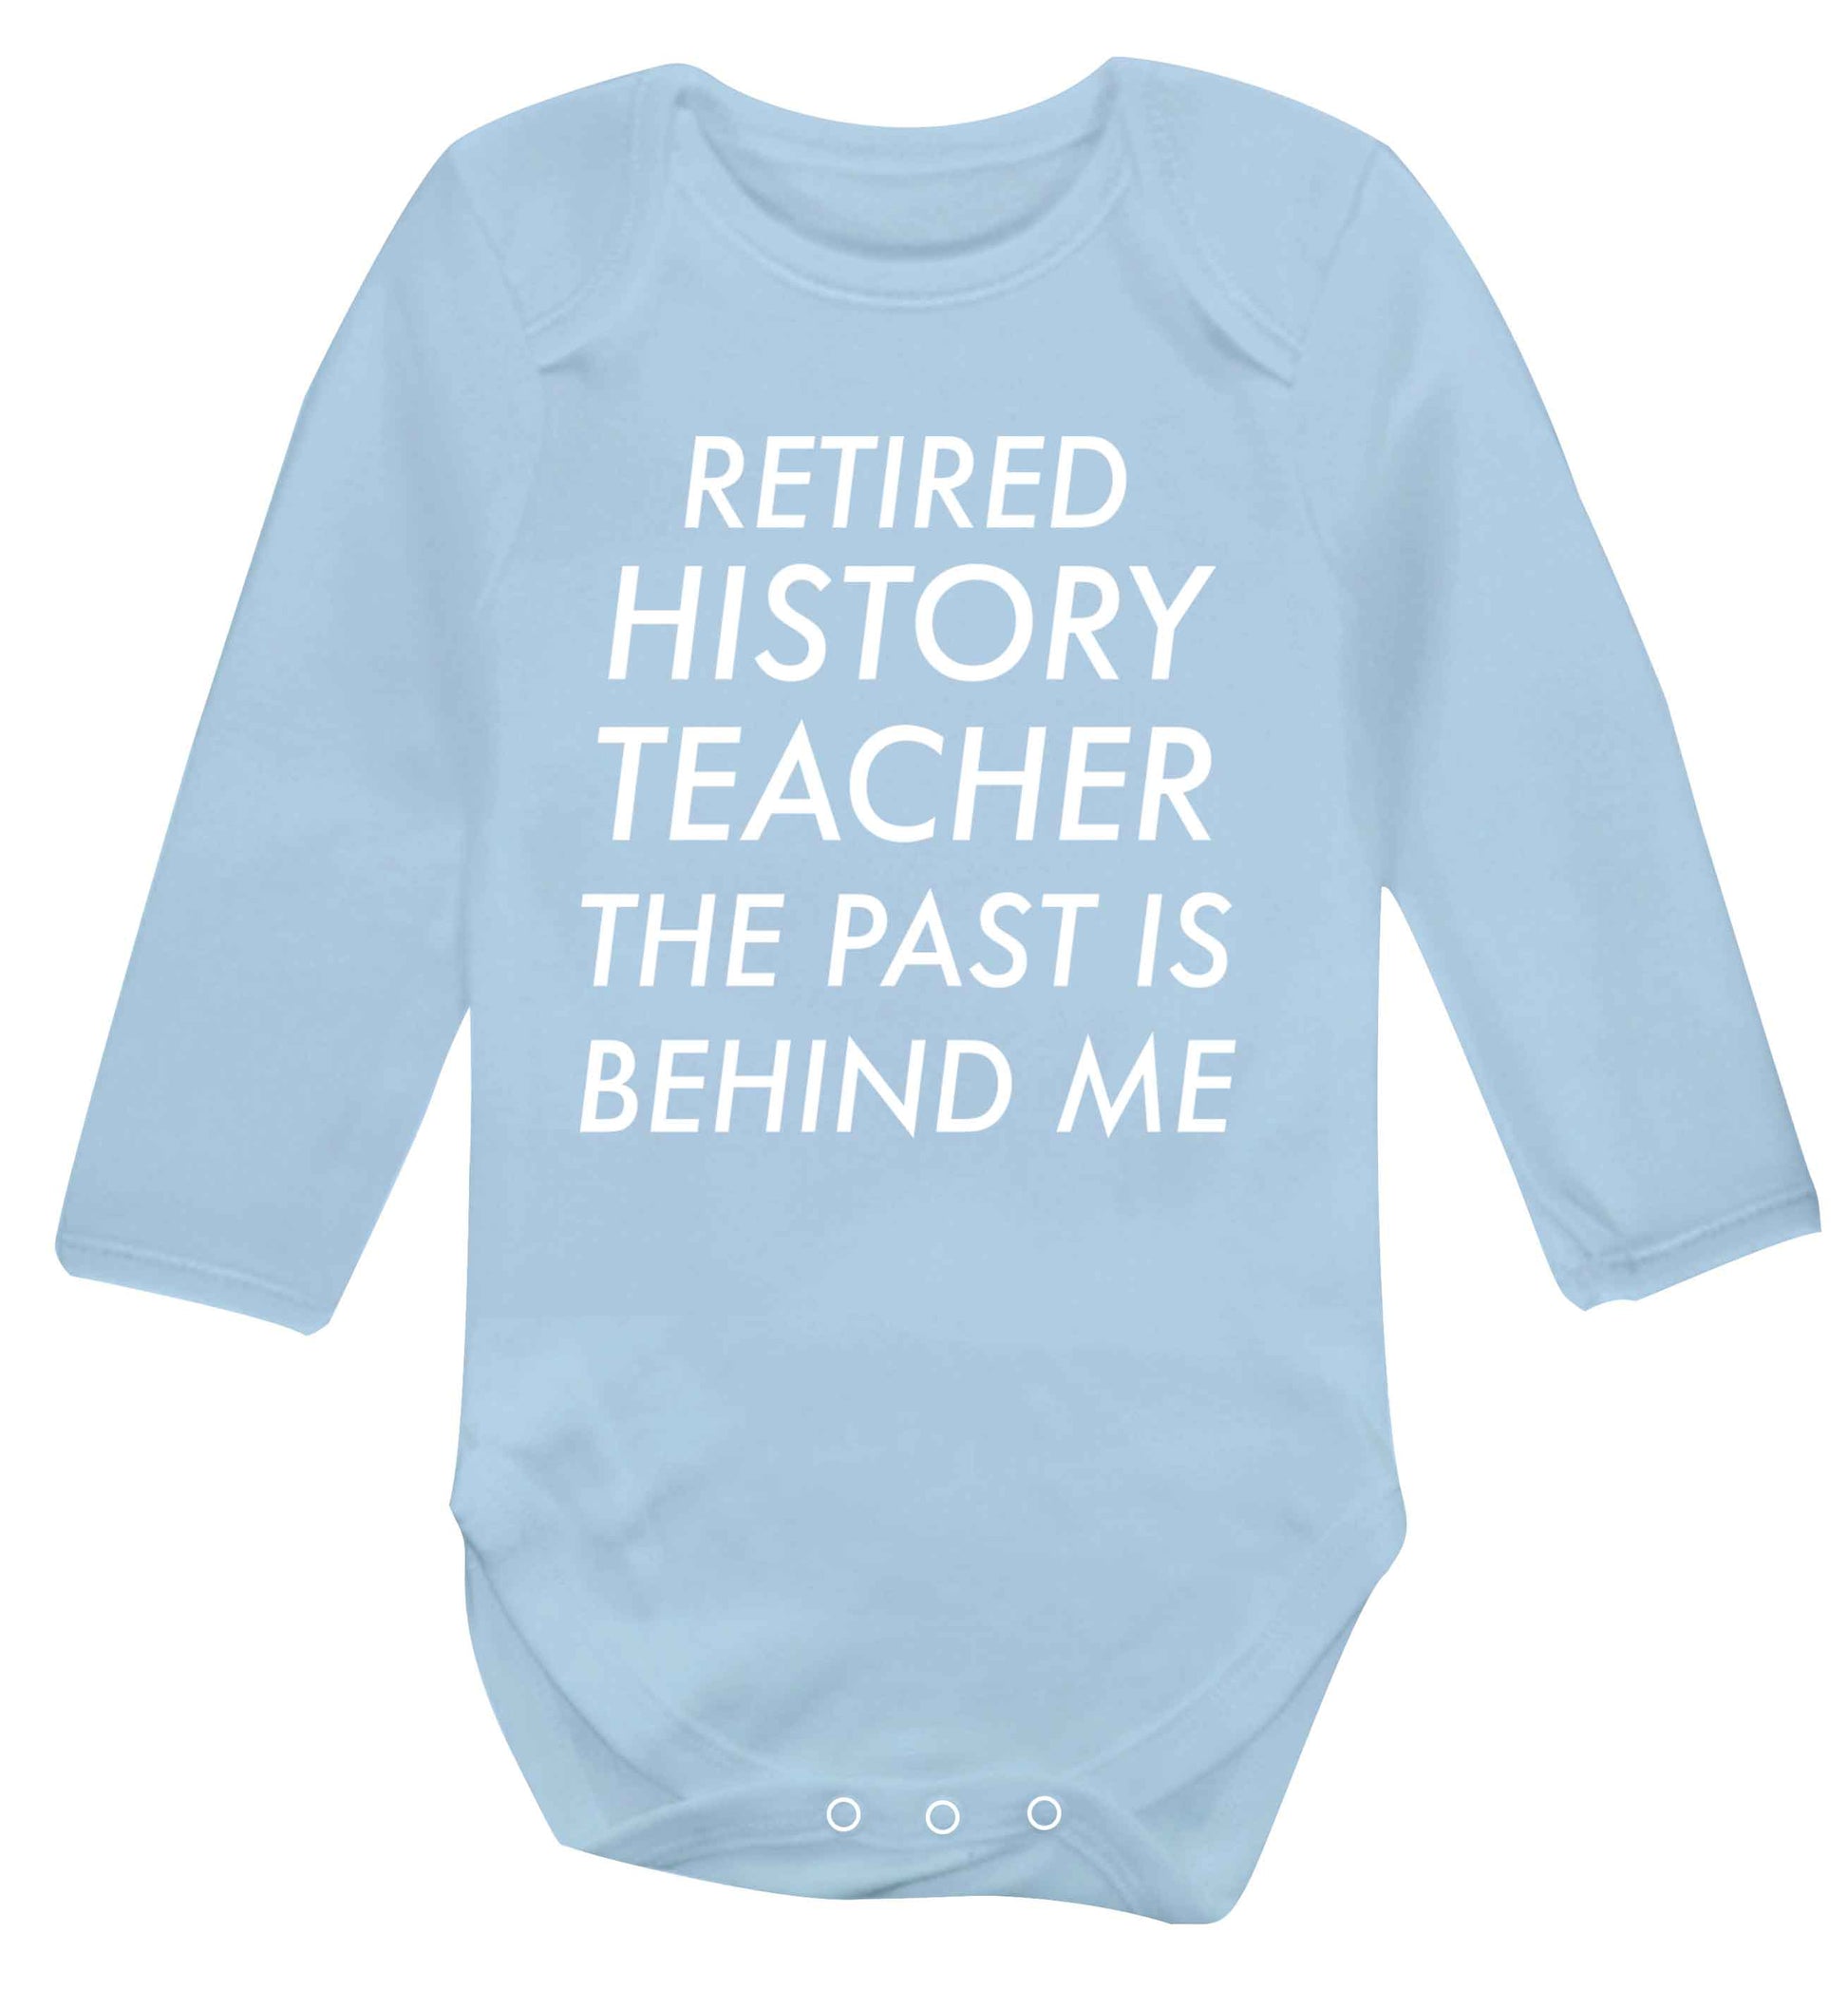 Retired history teacher the past is behind me Baby Vest long sleeved pale blue 6-12 months